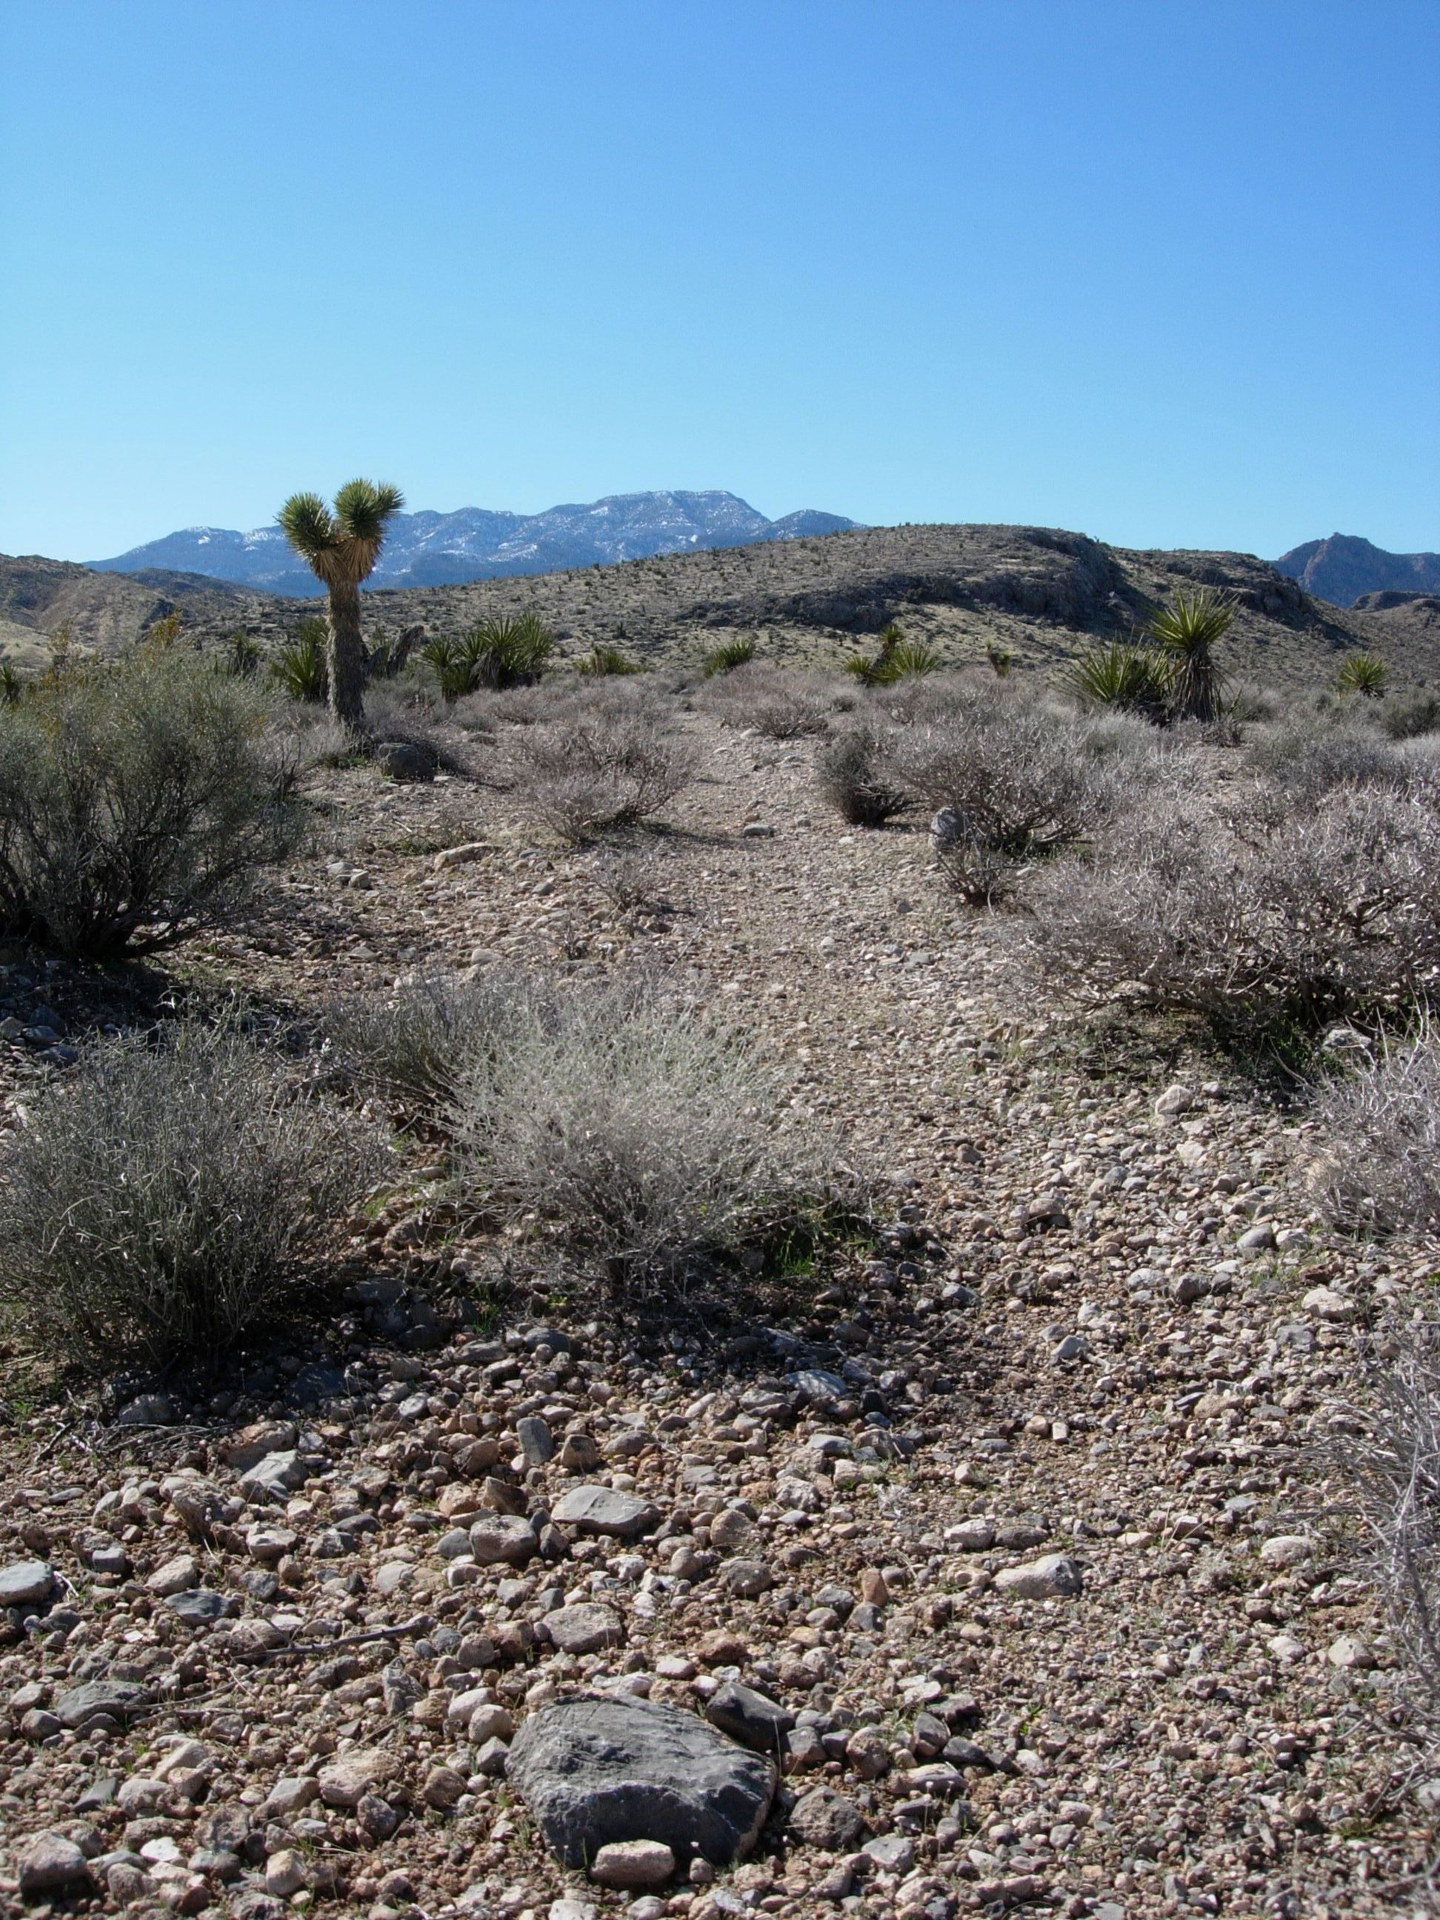 rocky trail through desert with yucca, mountain in the background